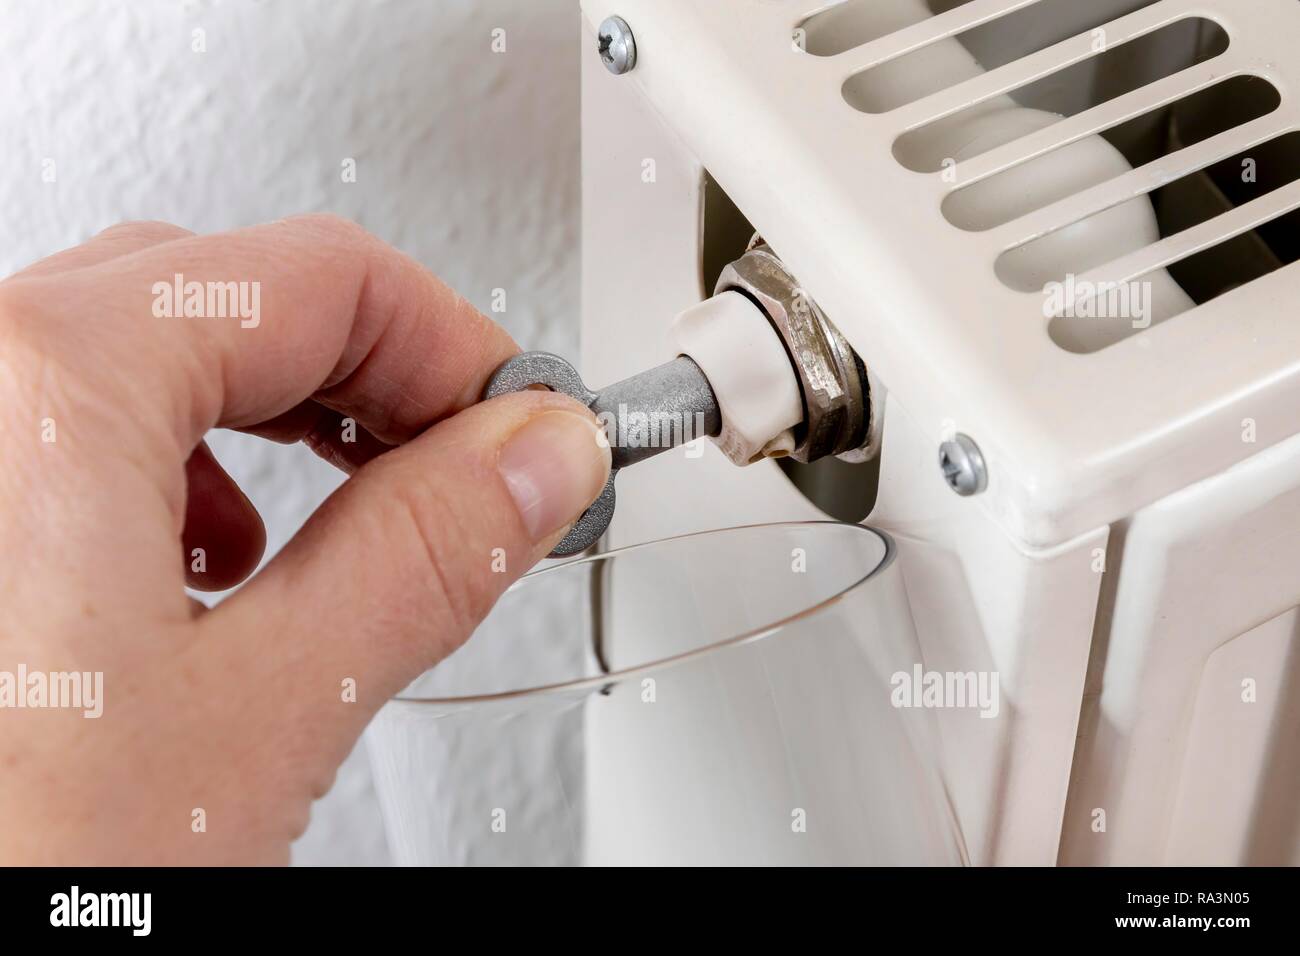 Hand venting a radiator with a special key, Bavaria, Germany Stock Photo